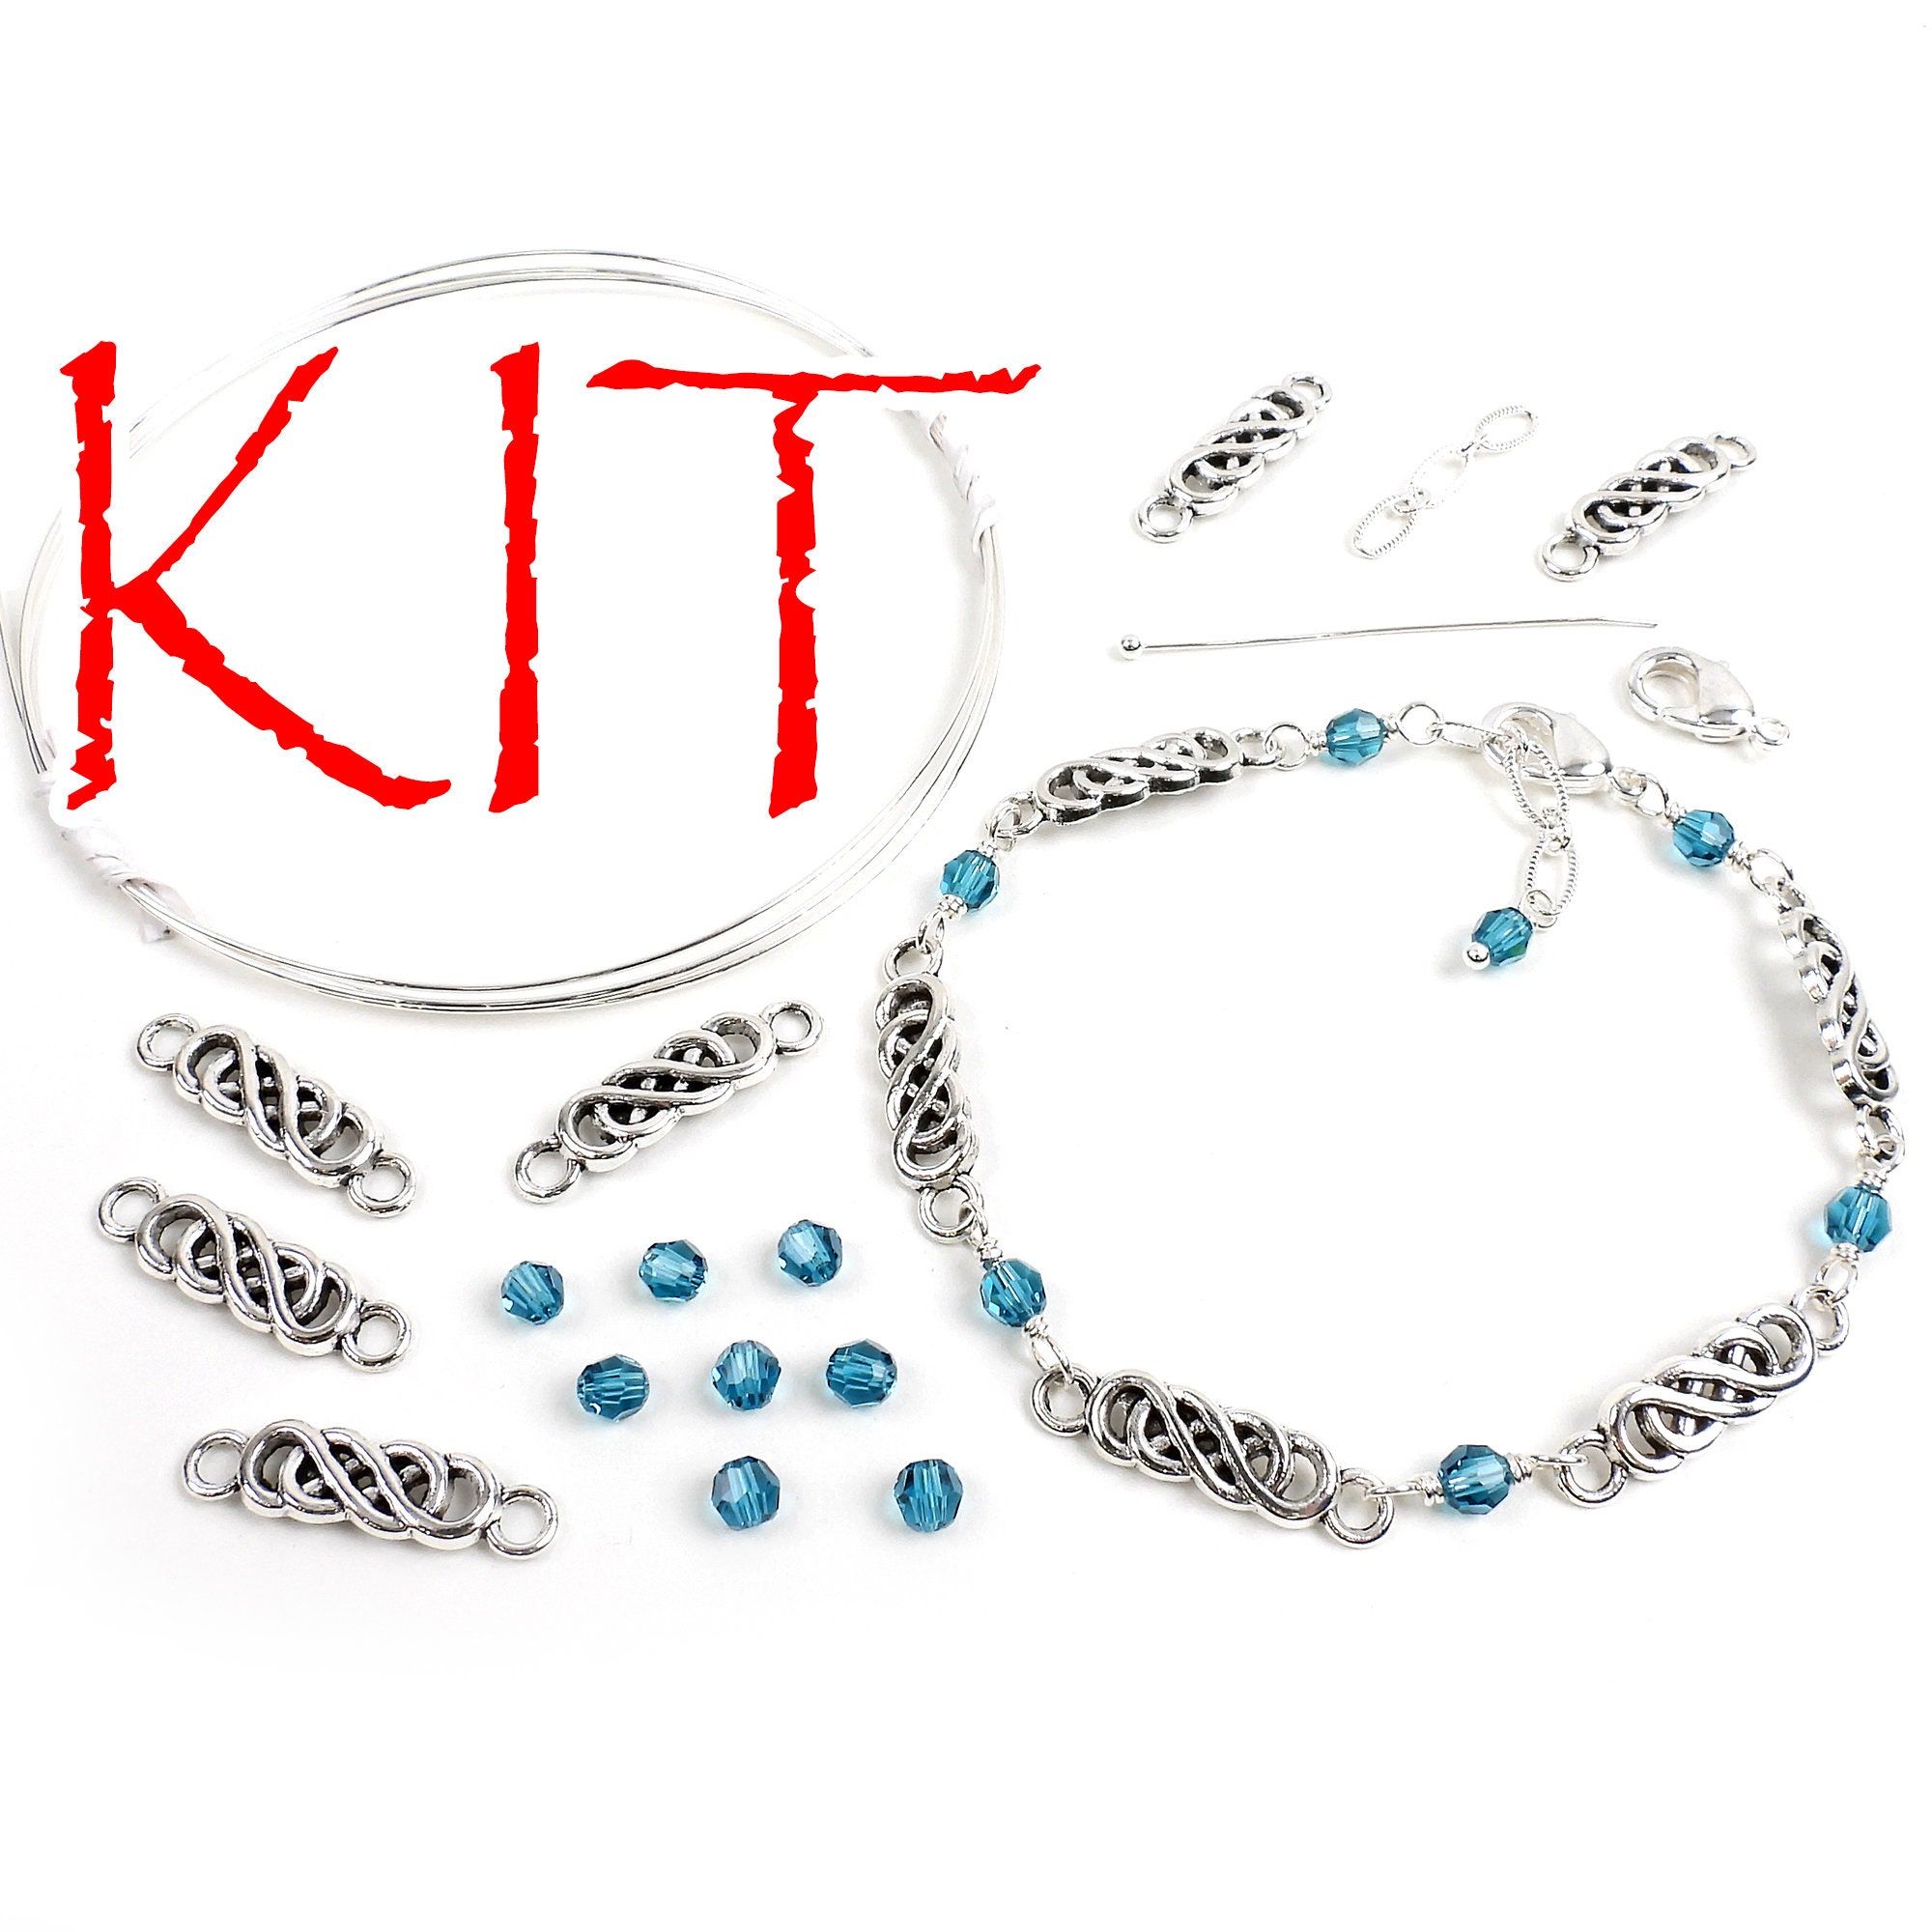 Jewelry Making Kit for Jewelry Making Supplies Kit With Jewelry Repair  Tools Beginners Jewelry Making Kit 